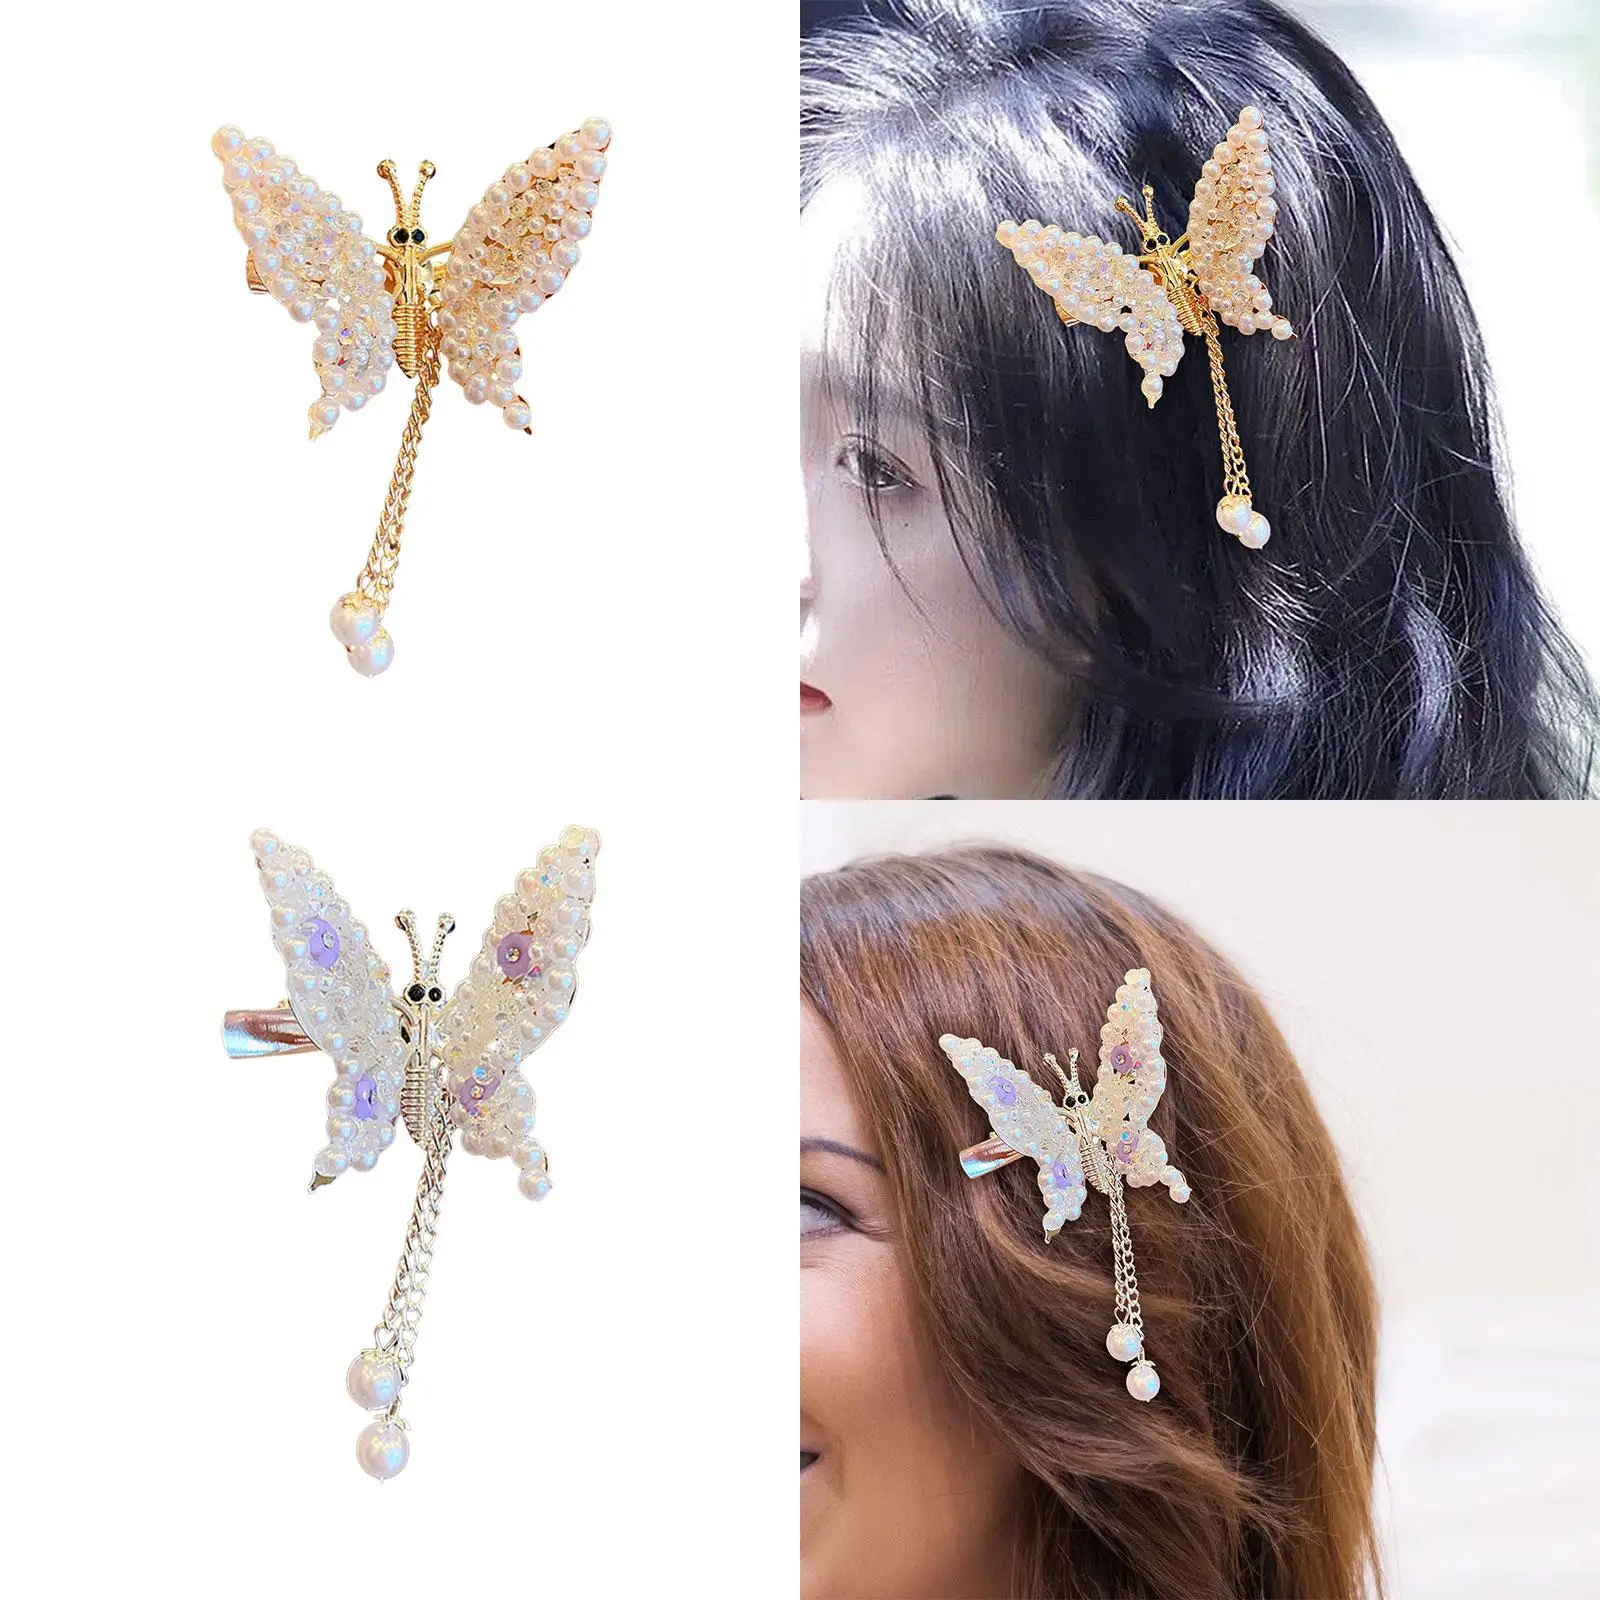 2Pcs Moving Butterfly Hair Clips Metal Moving Wing Bride Wedding Decorative Head Pieces Hair Accessories for Kids Girls Women